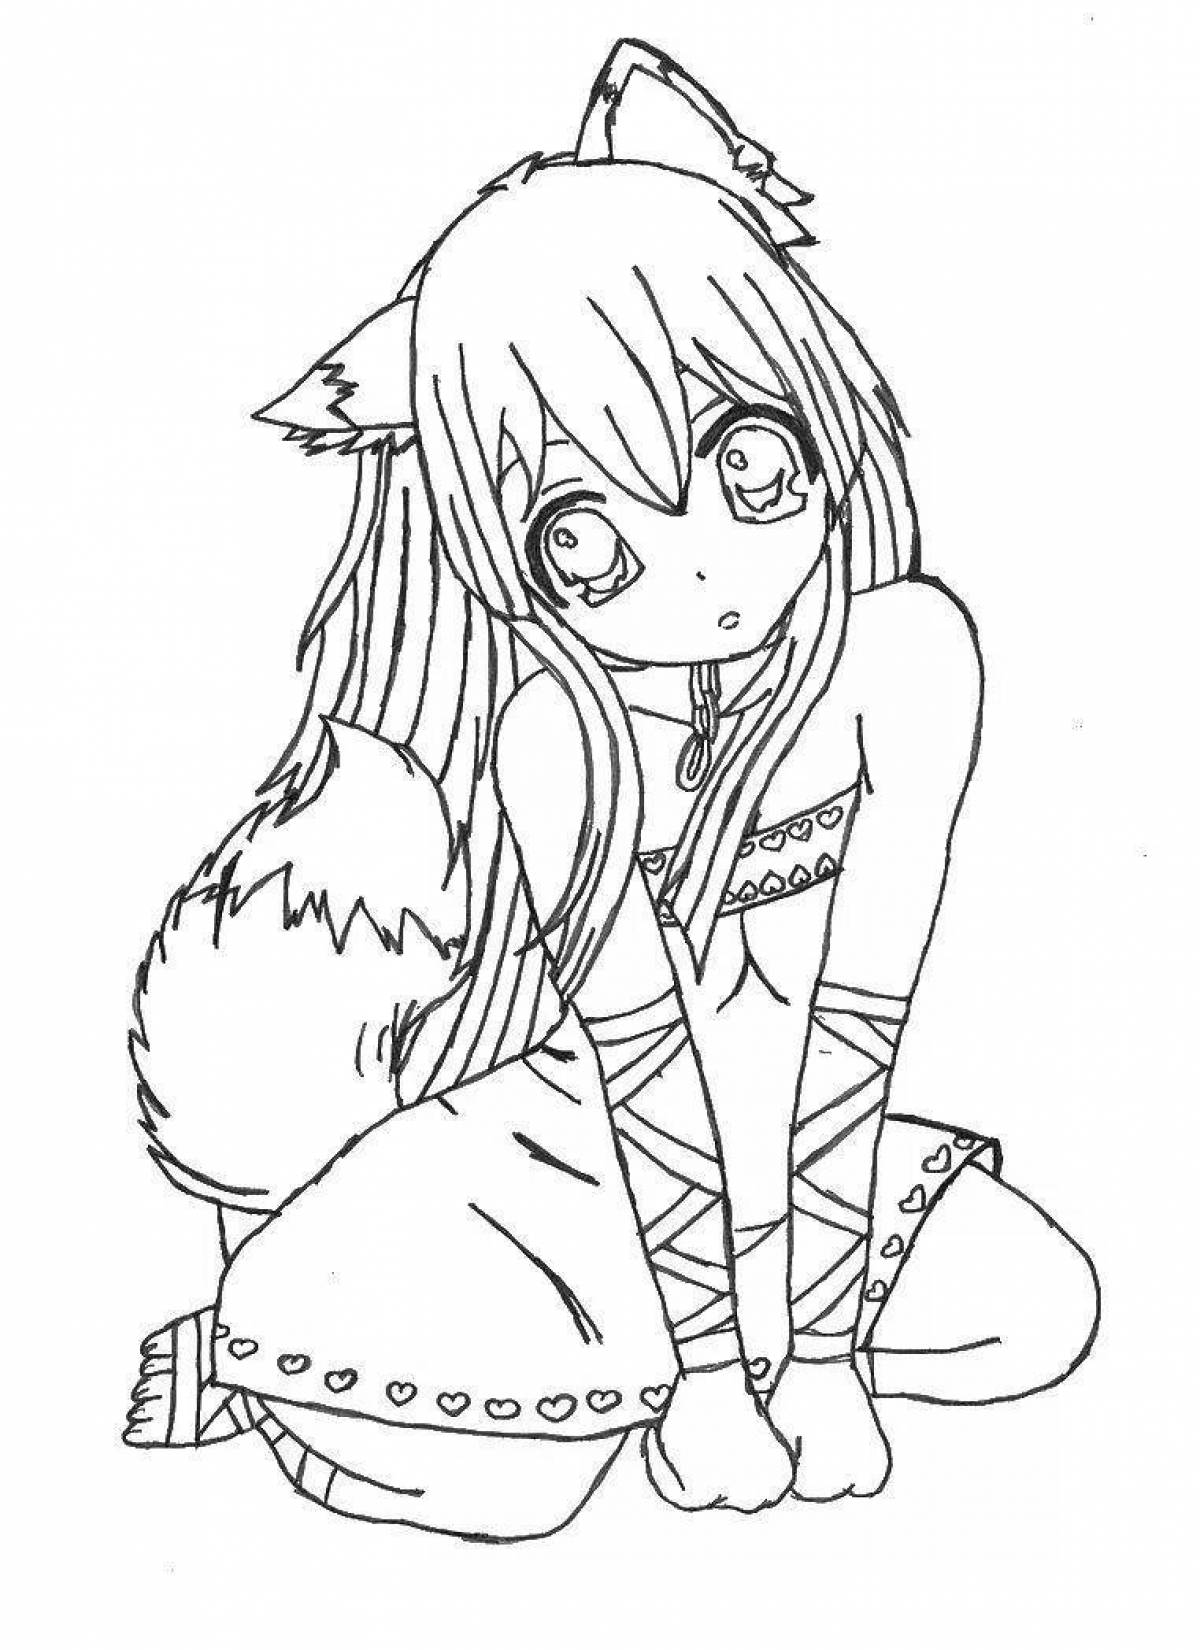 Radiant wifey coloring page